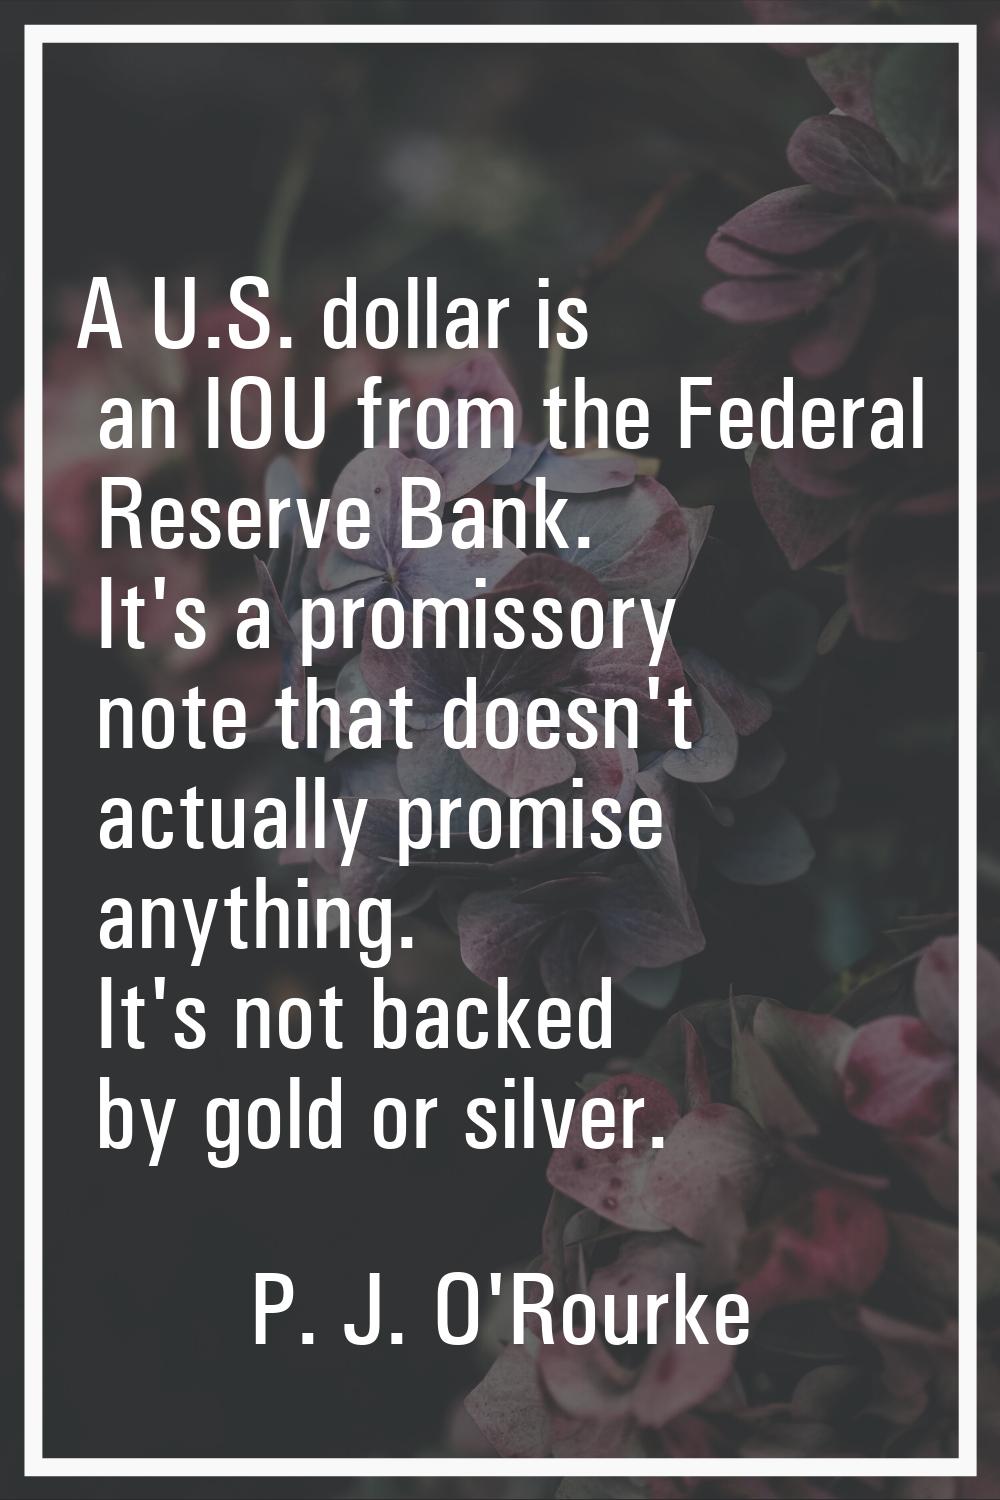 A U.S. dollar is an IOU from the Federal Reserve Bank. It's a promissory note that doesn't actually